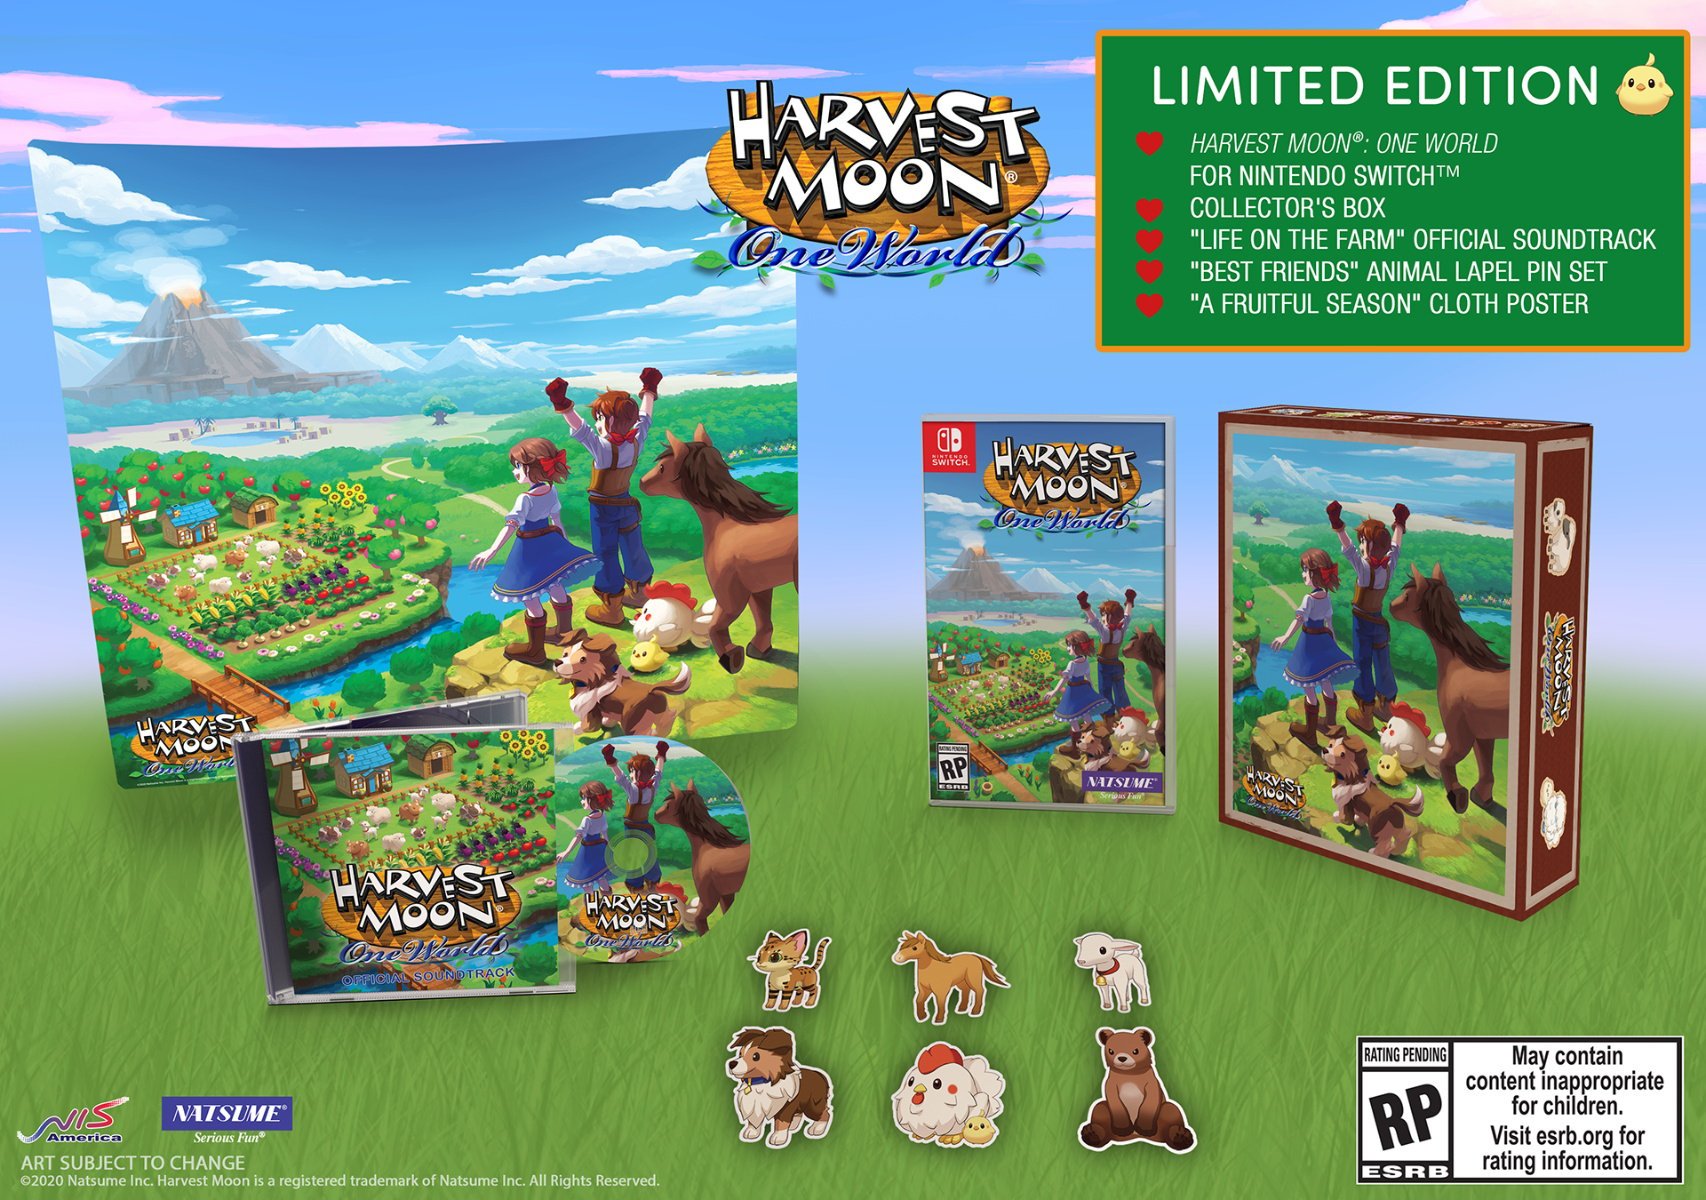 Embrace Farm Life With This Harvest Moon: One World Limited Edition For Nintendo Switch - Nintendo Life